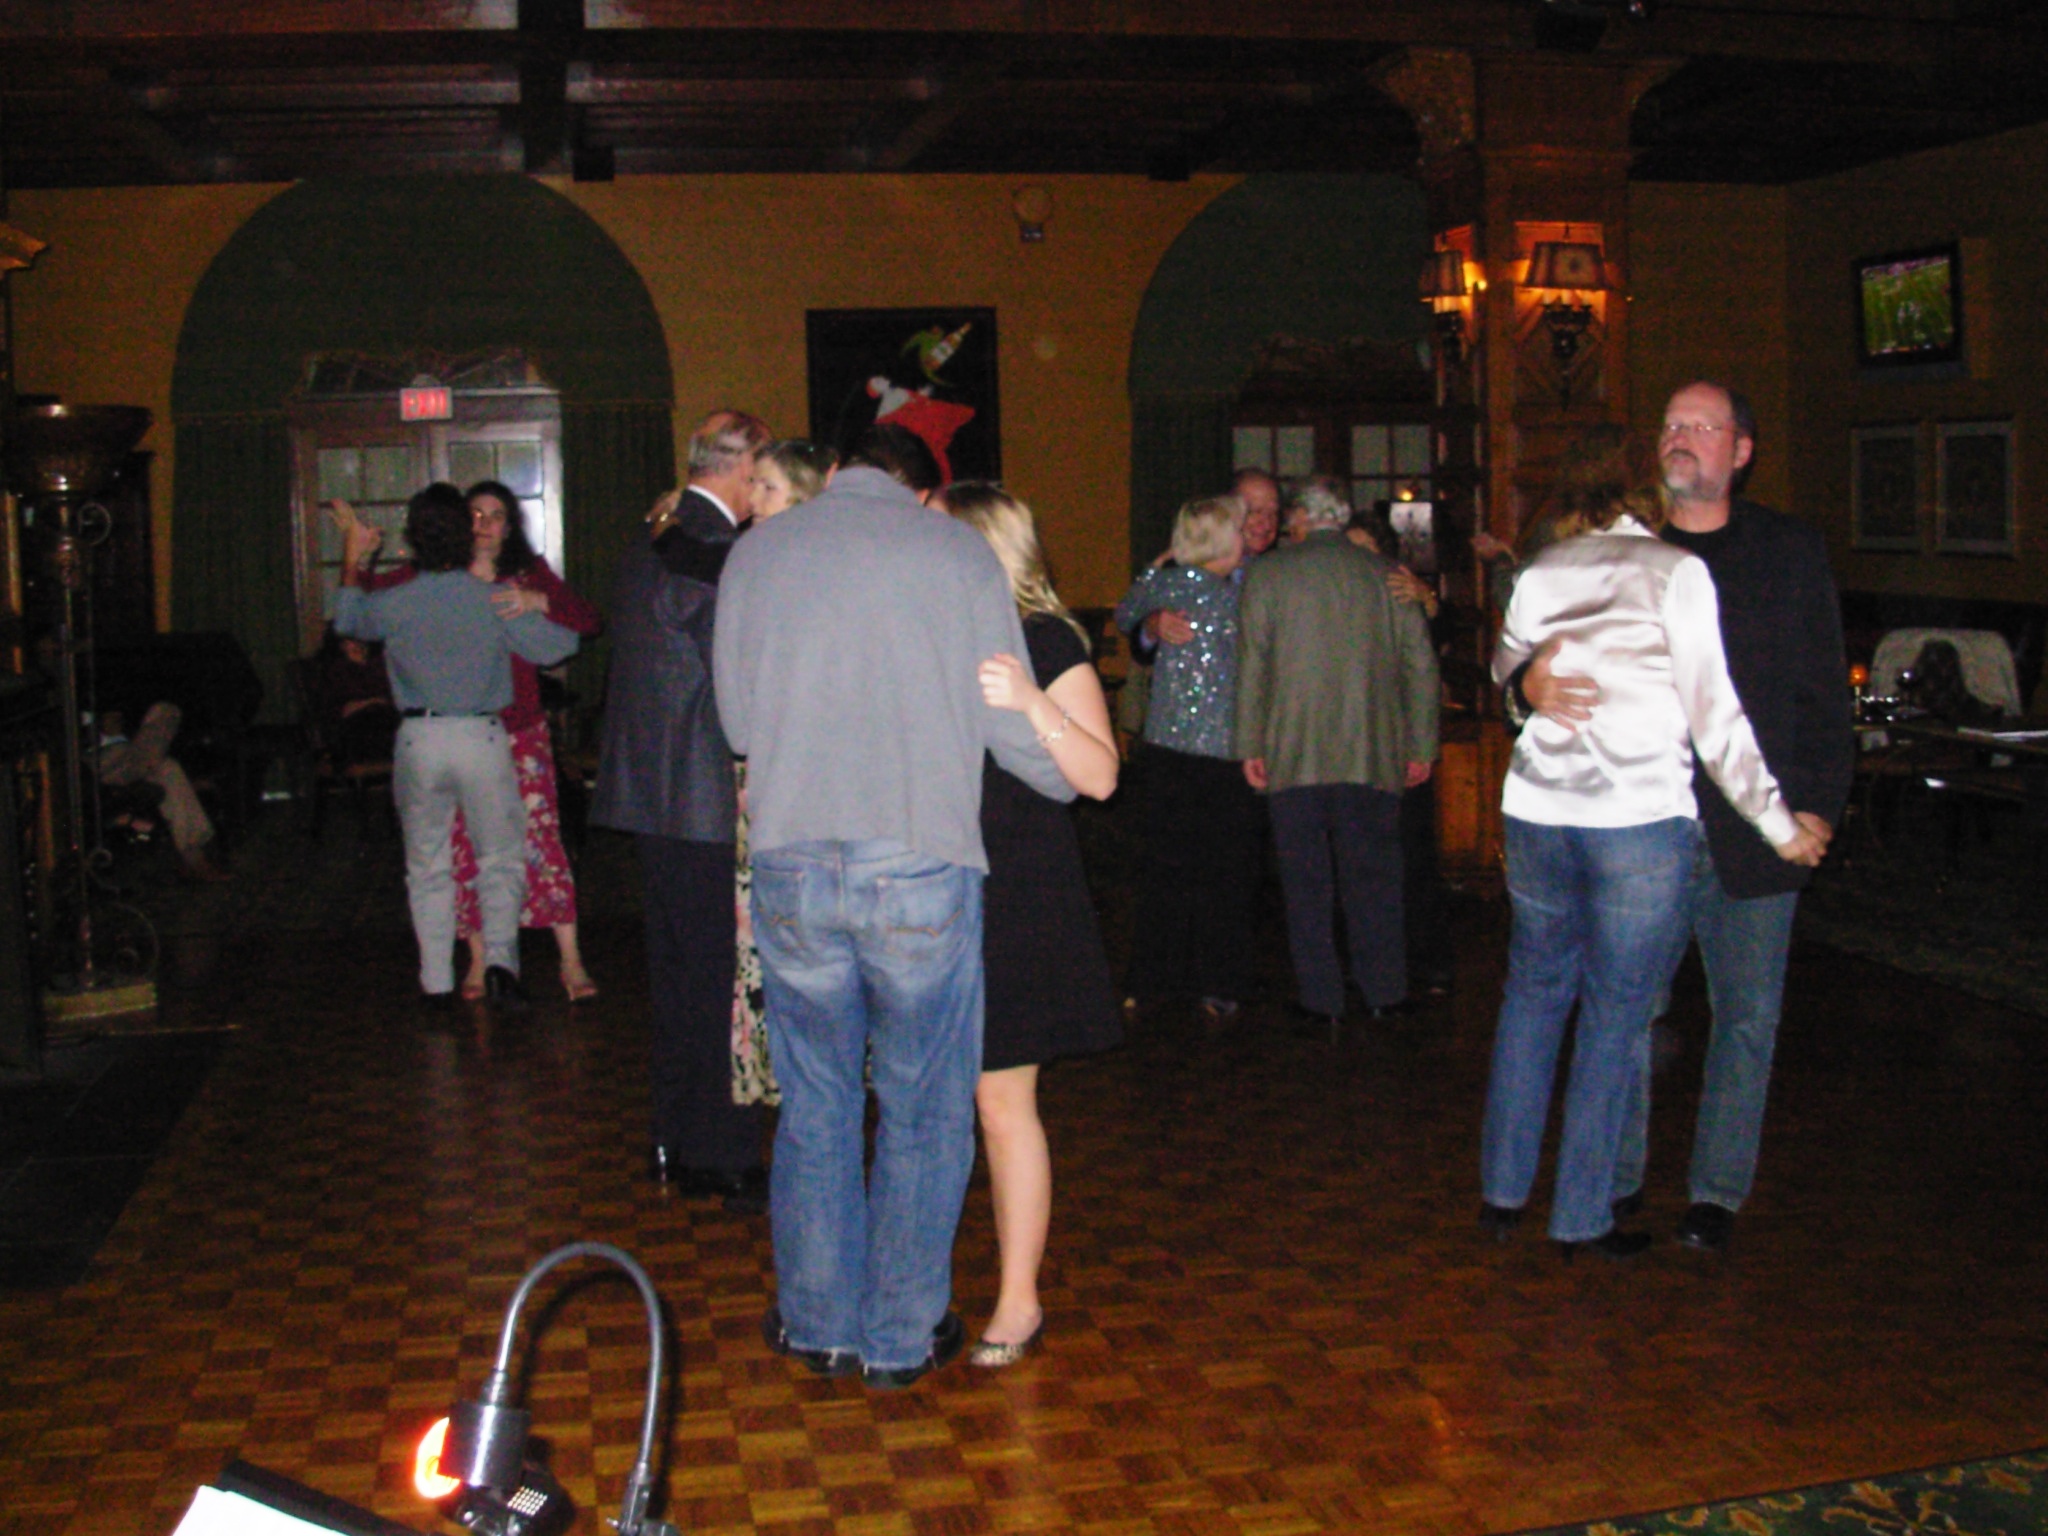 Dancing at the Iberian Lounge in Hershey
